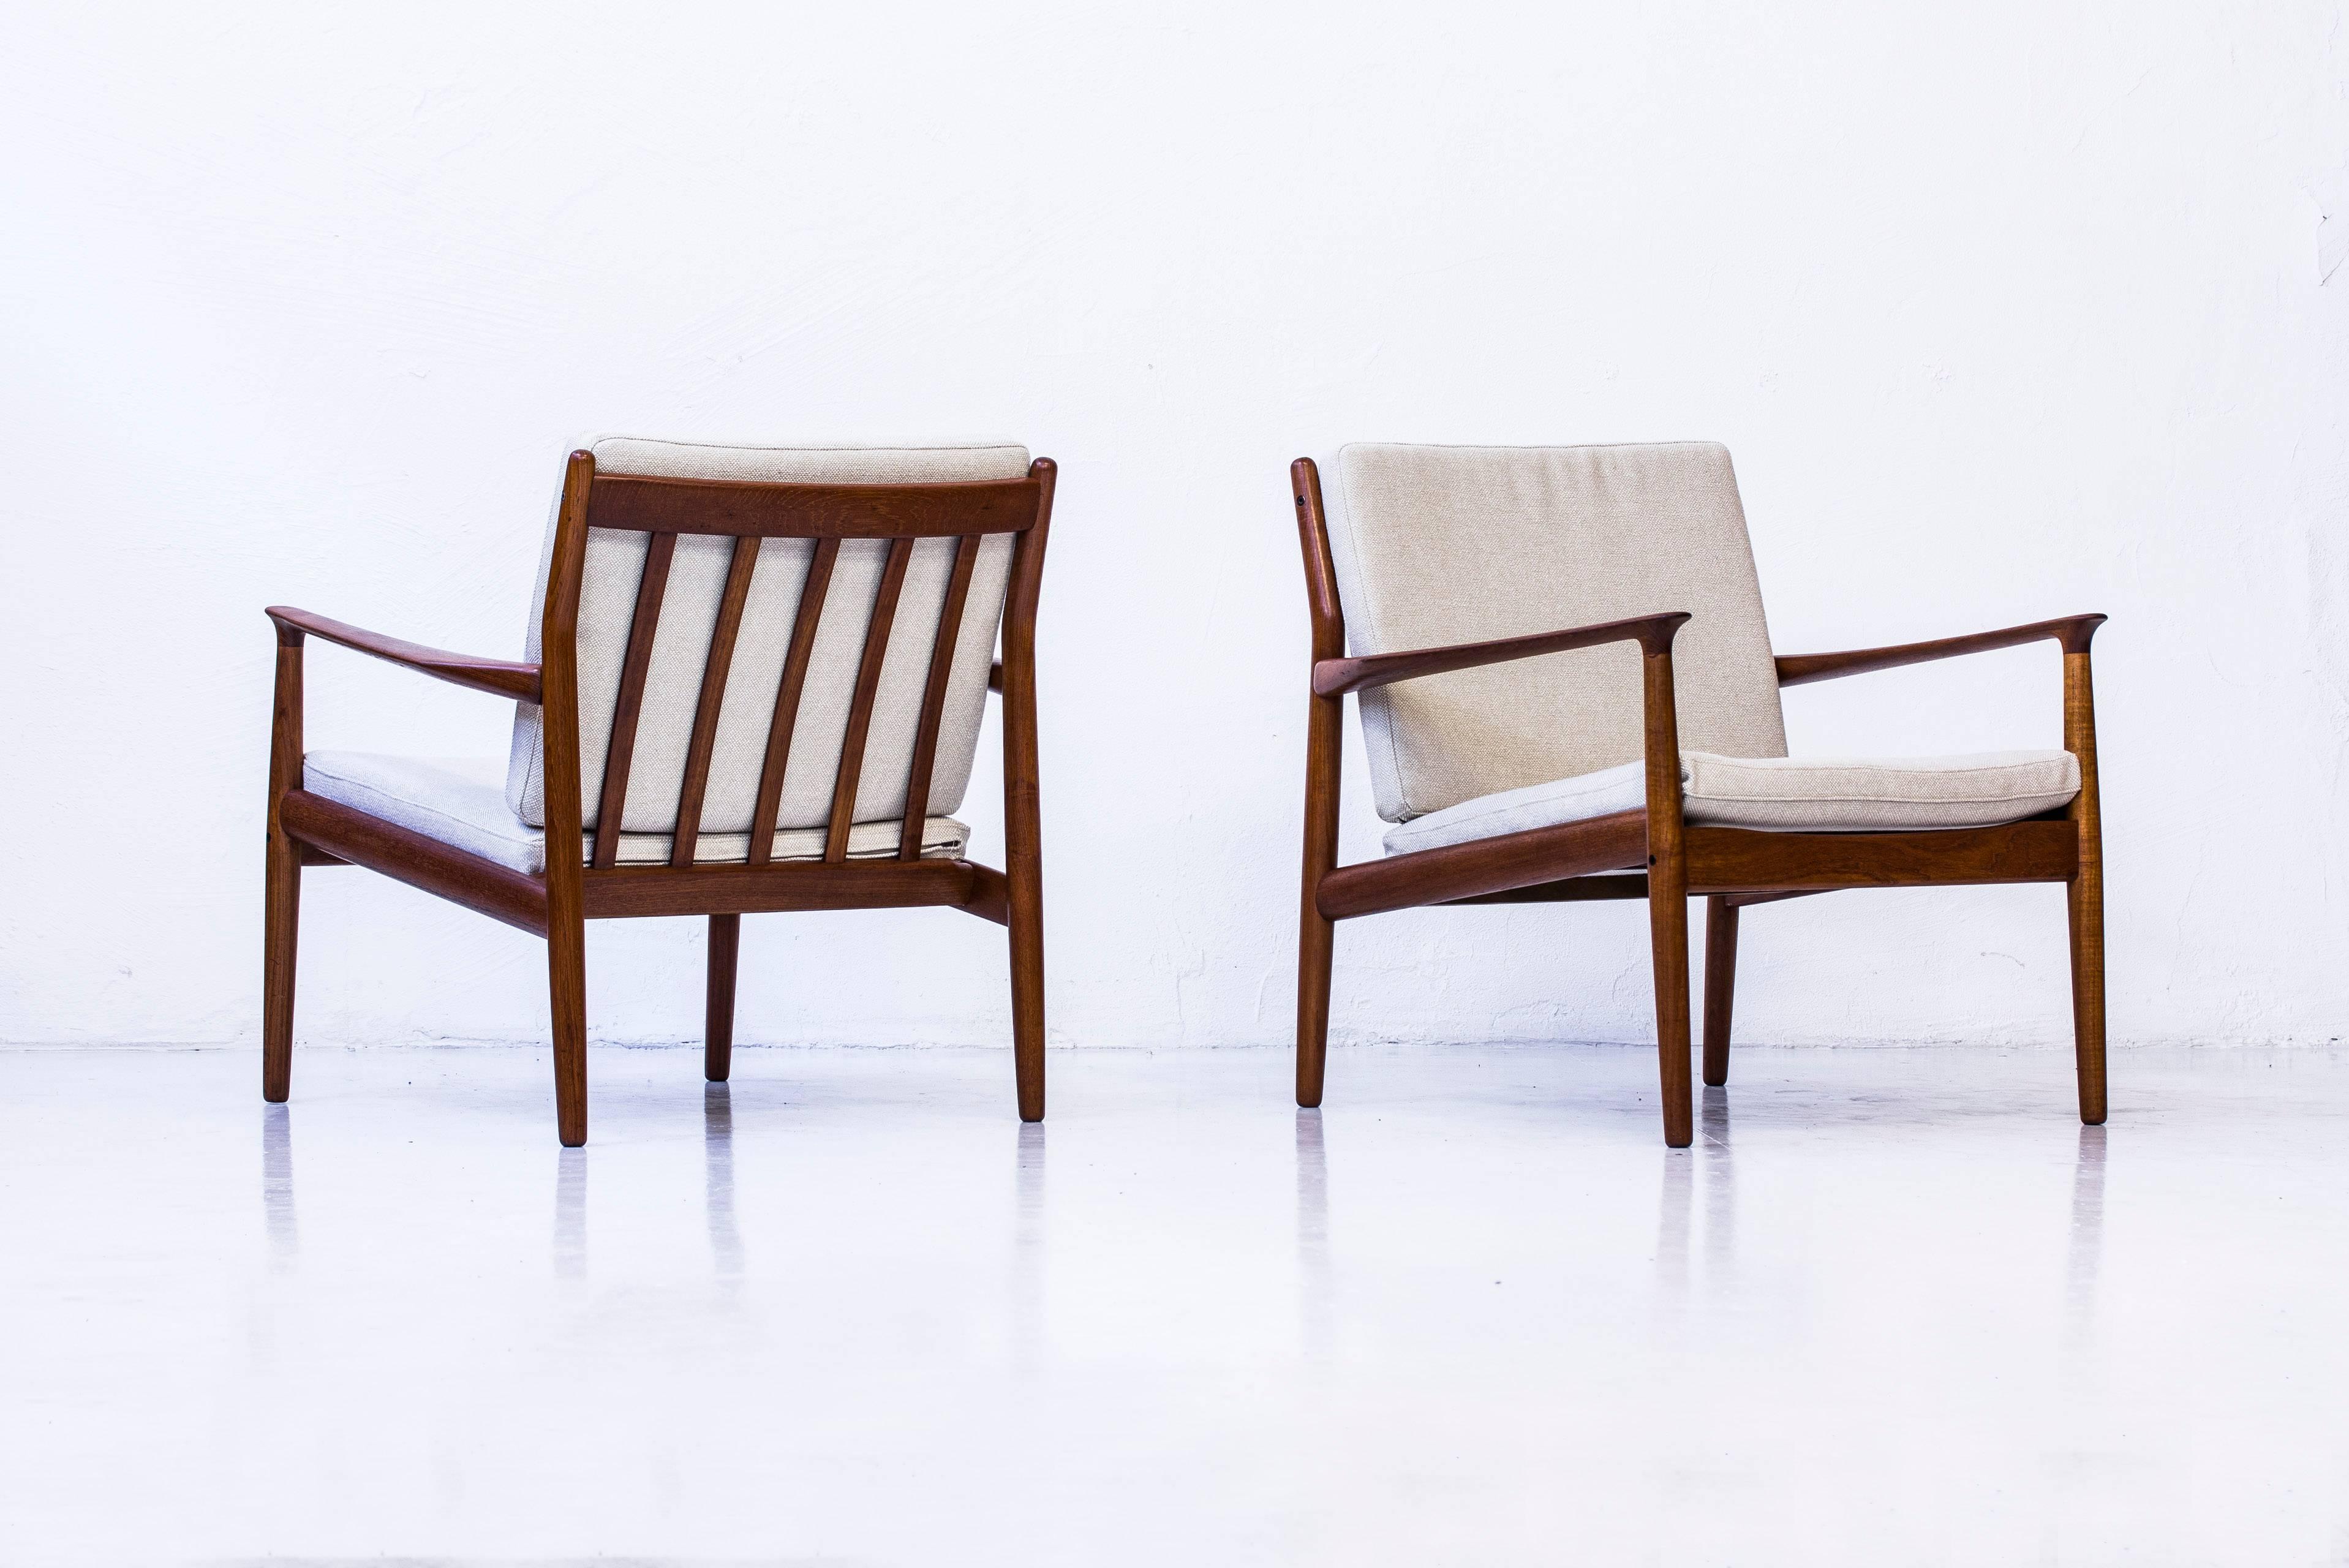 Pair of easy chairs designed by Grete Jalk. Produced in Denmark during the 1950s by Glostrup Møbelfabrik. Made from solid Bangkok teak wood with reupholstered cushions in 